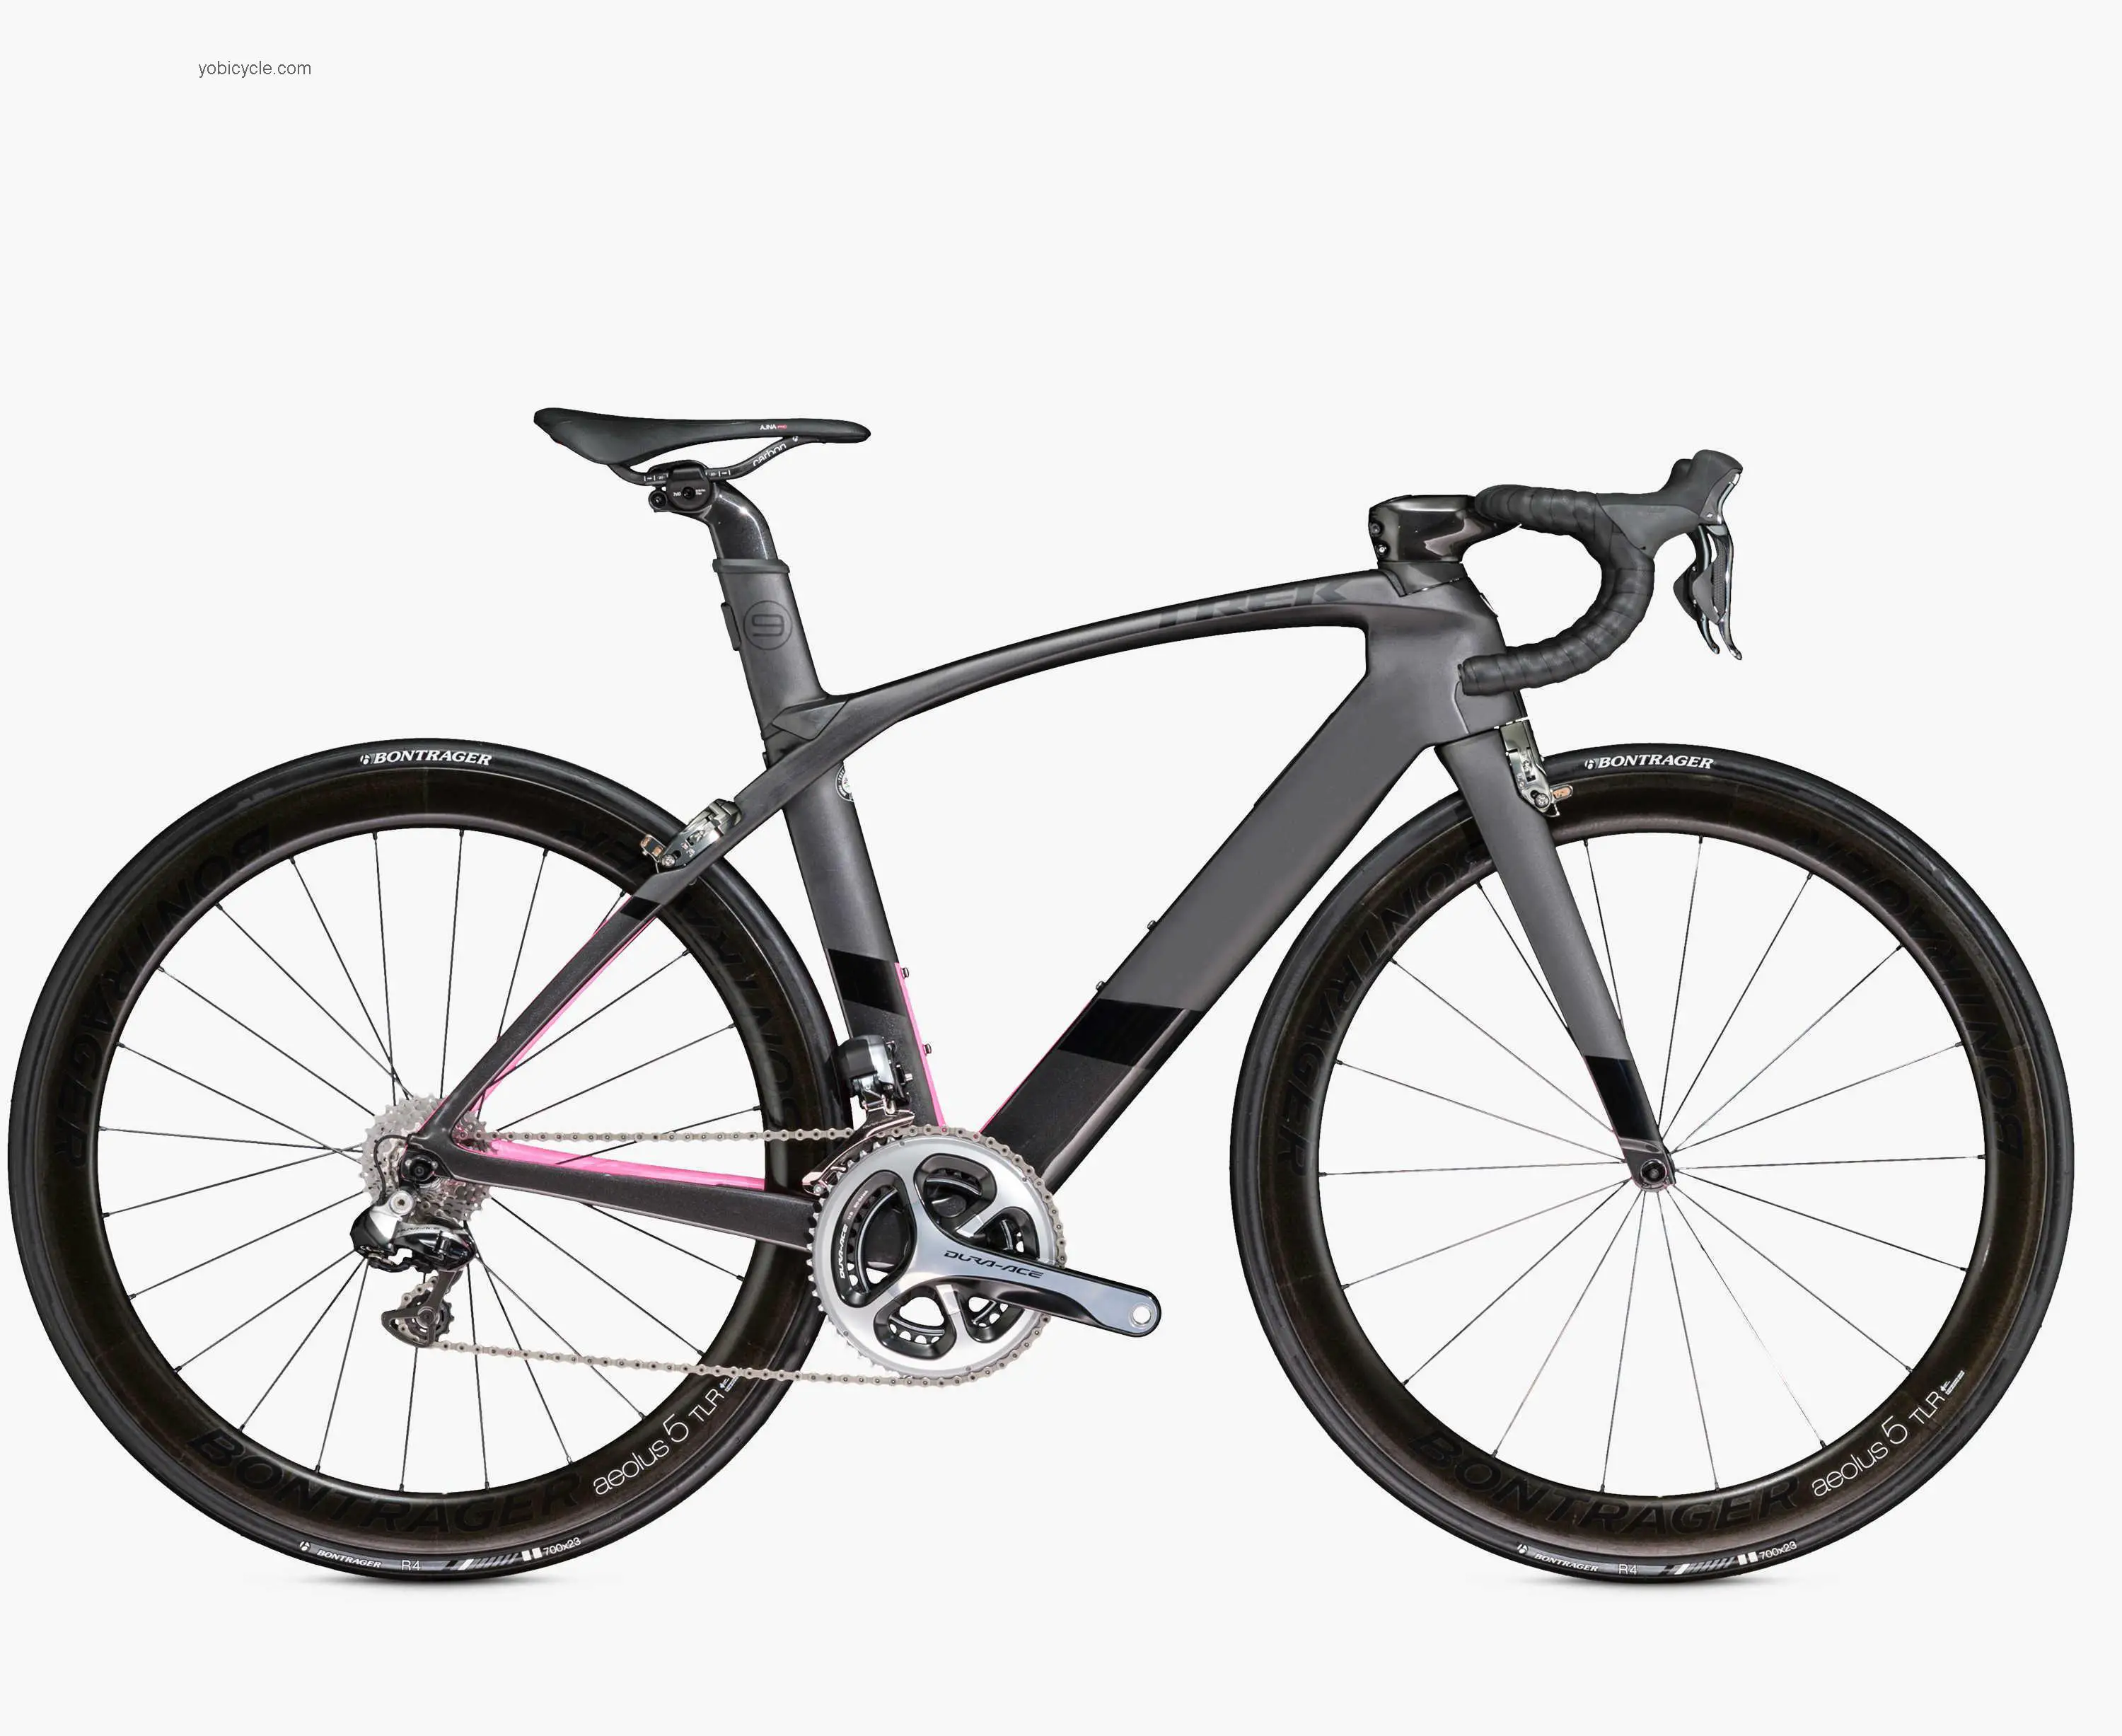 Trek Madone 9.9 WSD 2016 comparison online with competitors